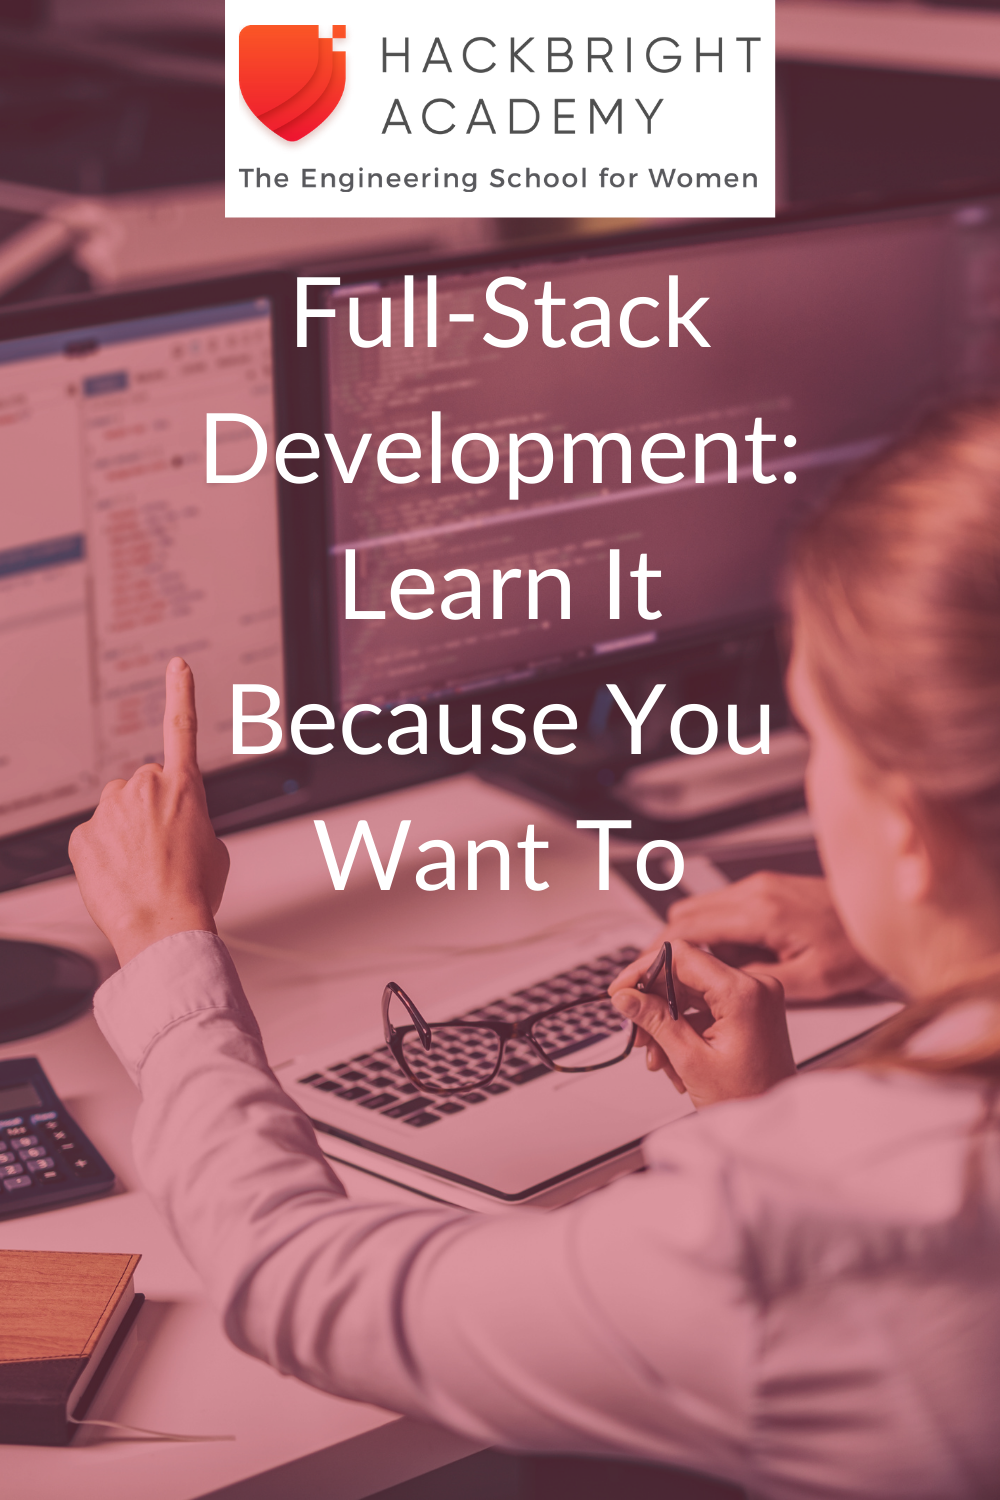 Full-Stack Development: Learn It Because You Want To